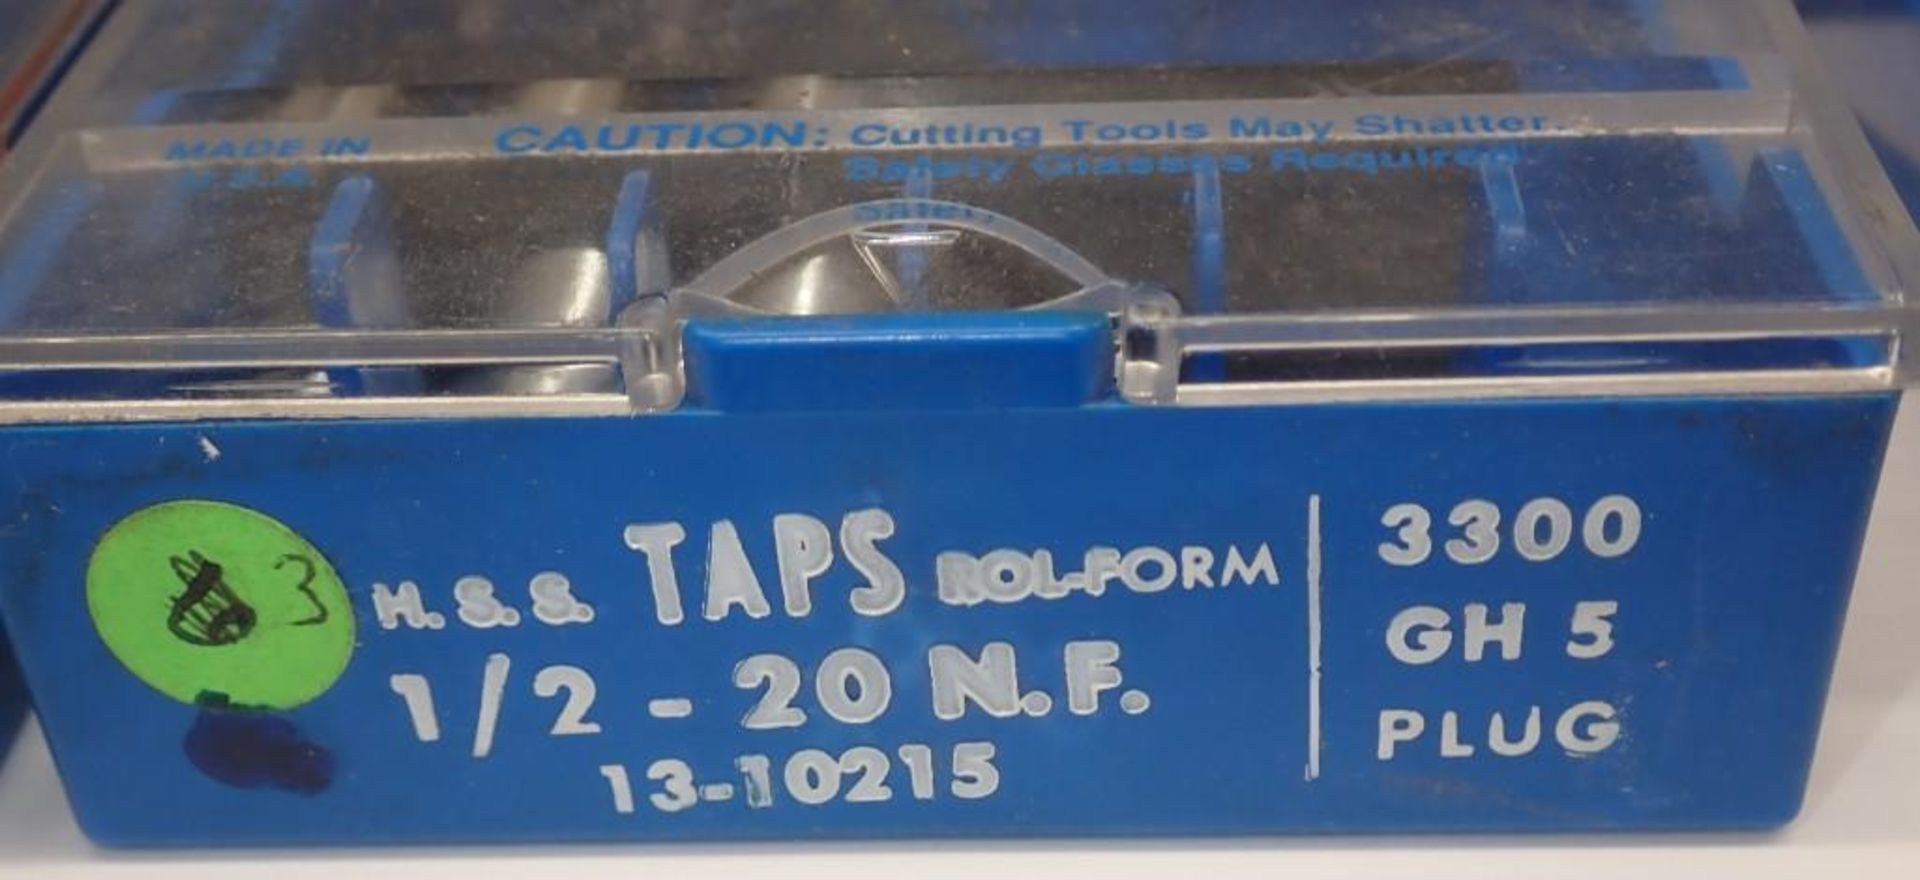 Lot of Union Butterfield Taps - Image 11 of 16